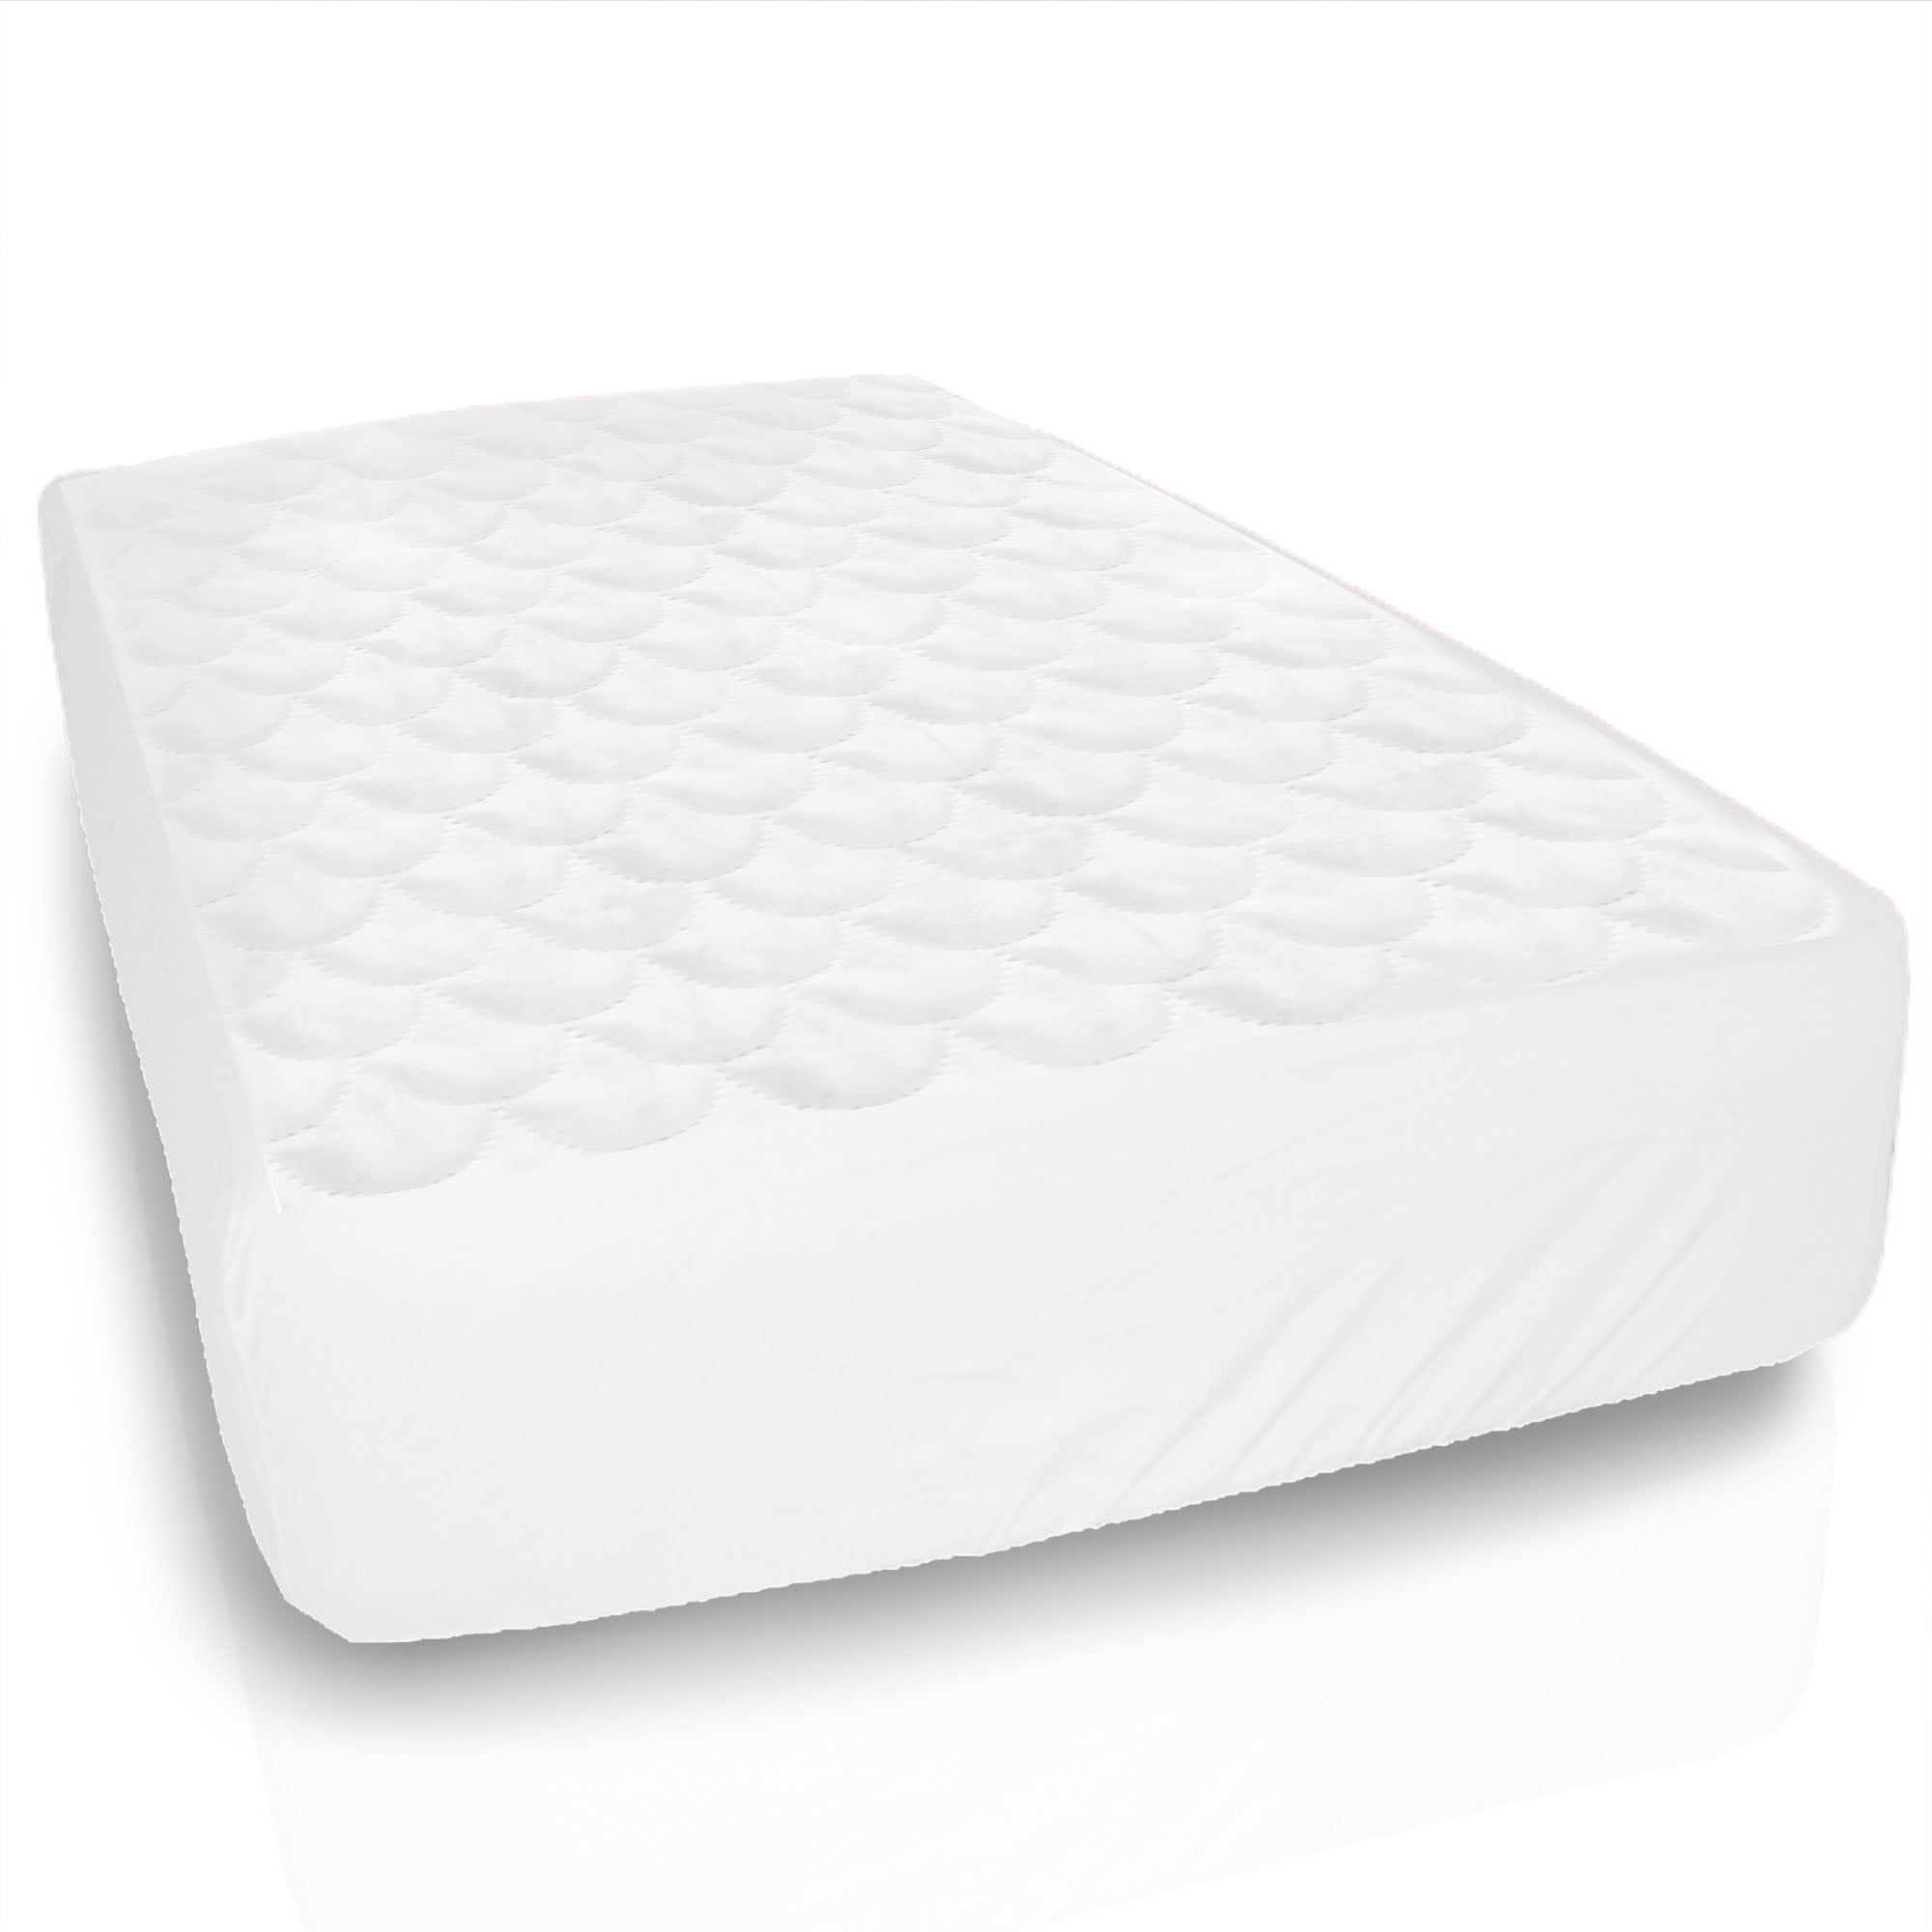 fitted crib mattress protector